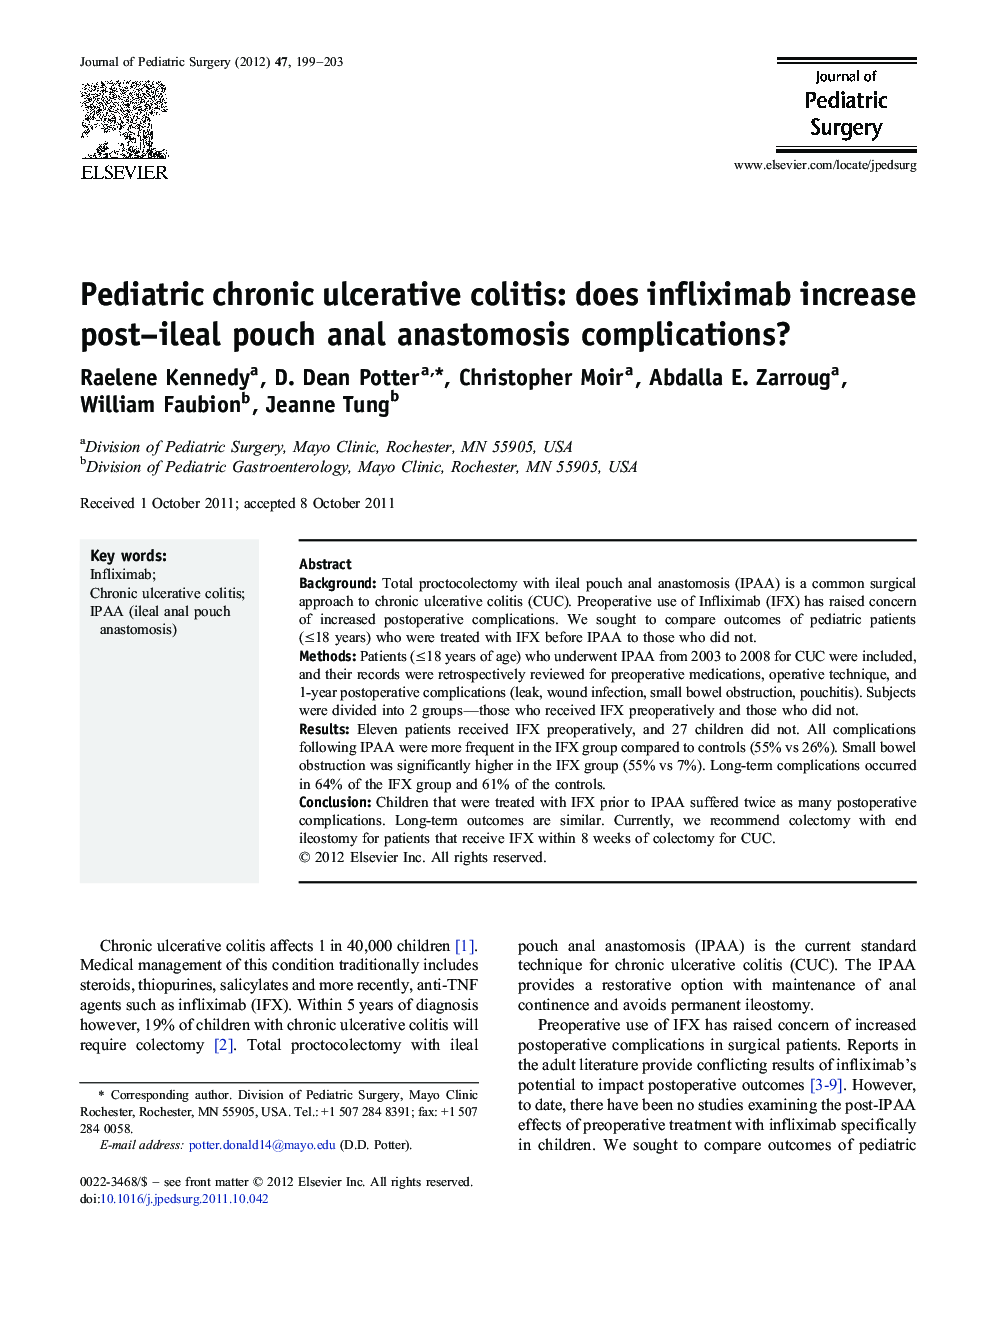 Pediatric chronic ulcerative colitis: does infliximab increase post–ileal pouch anal anastomosis complications?